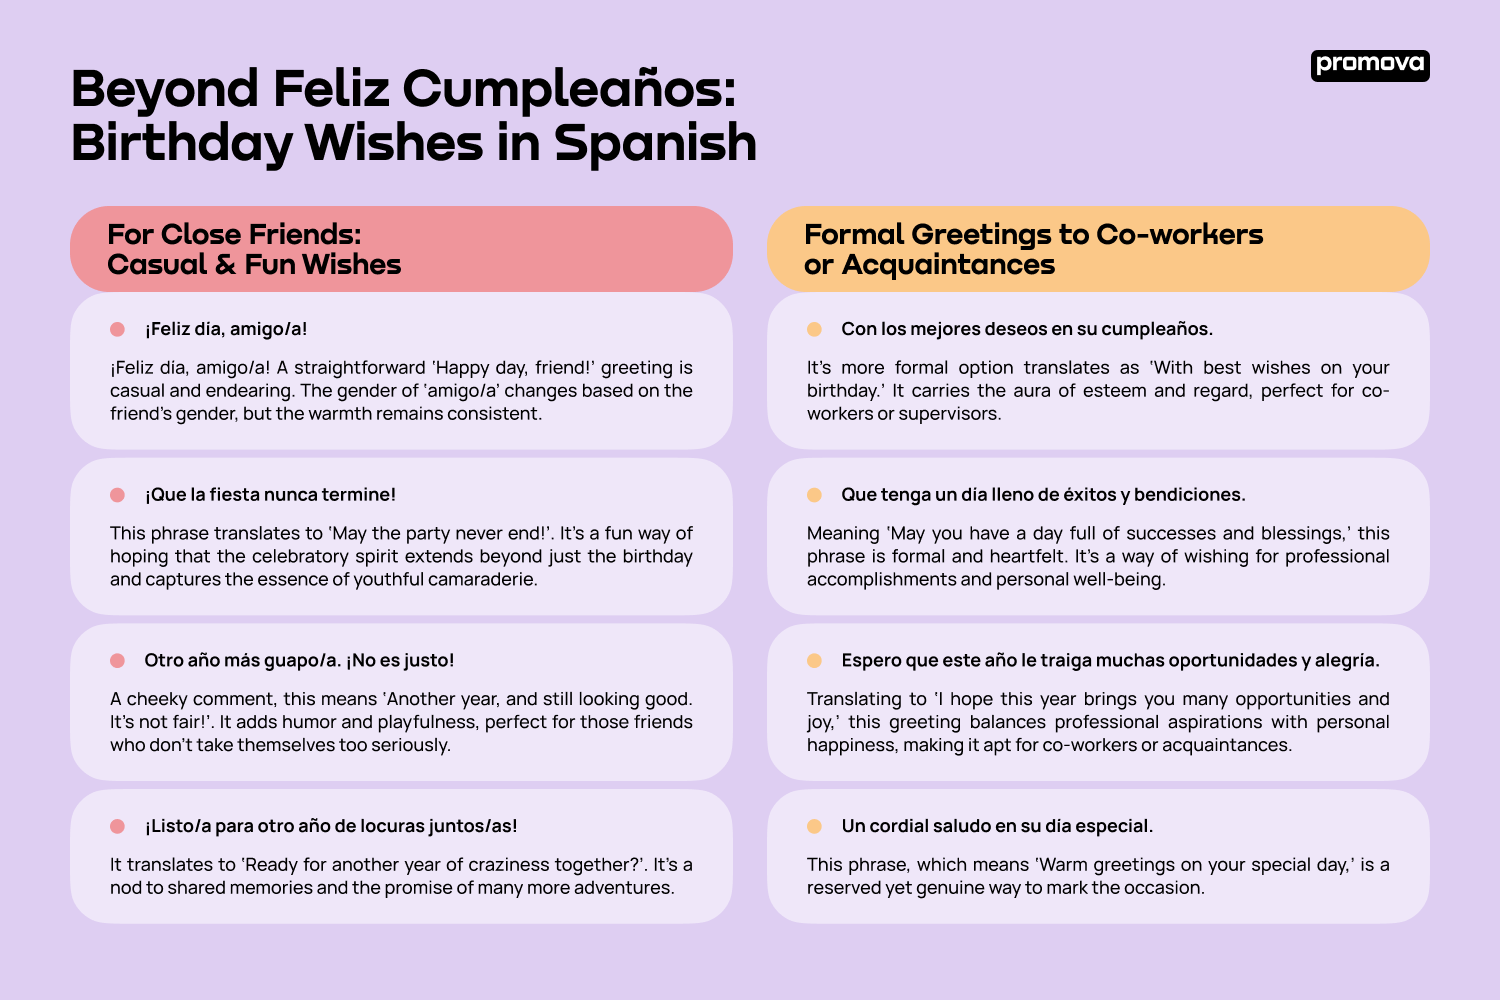 Learning All About Birthday Wishes in Spanish